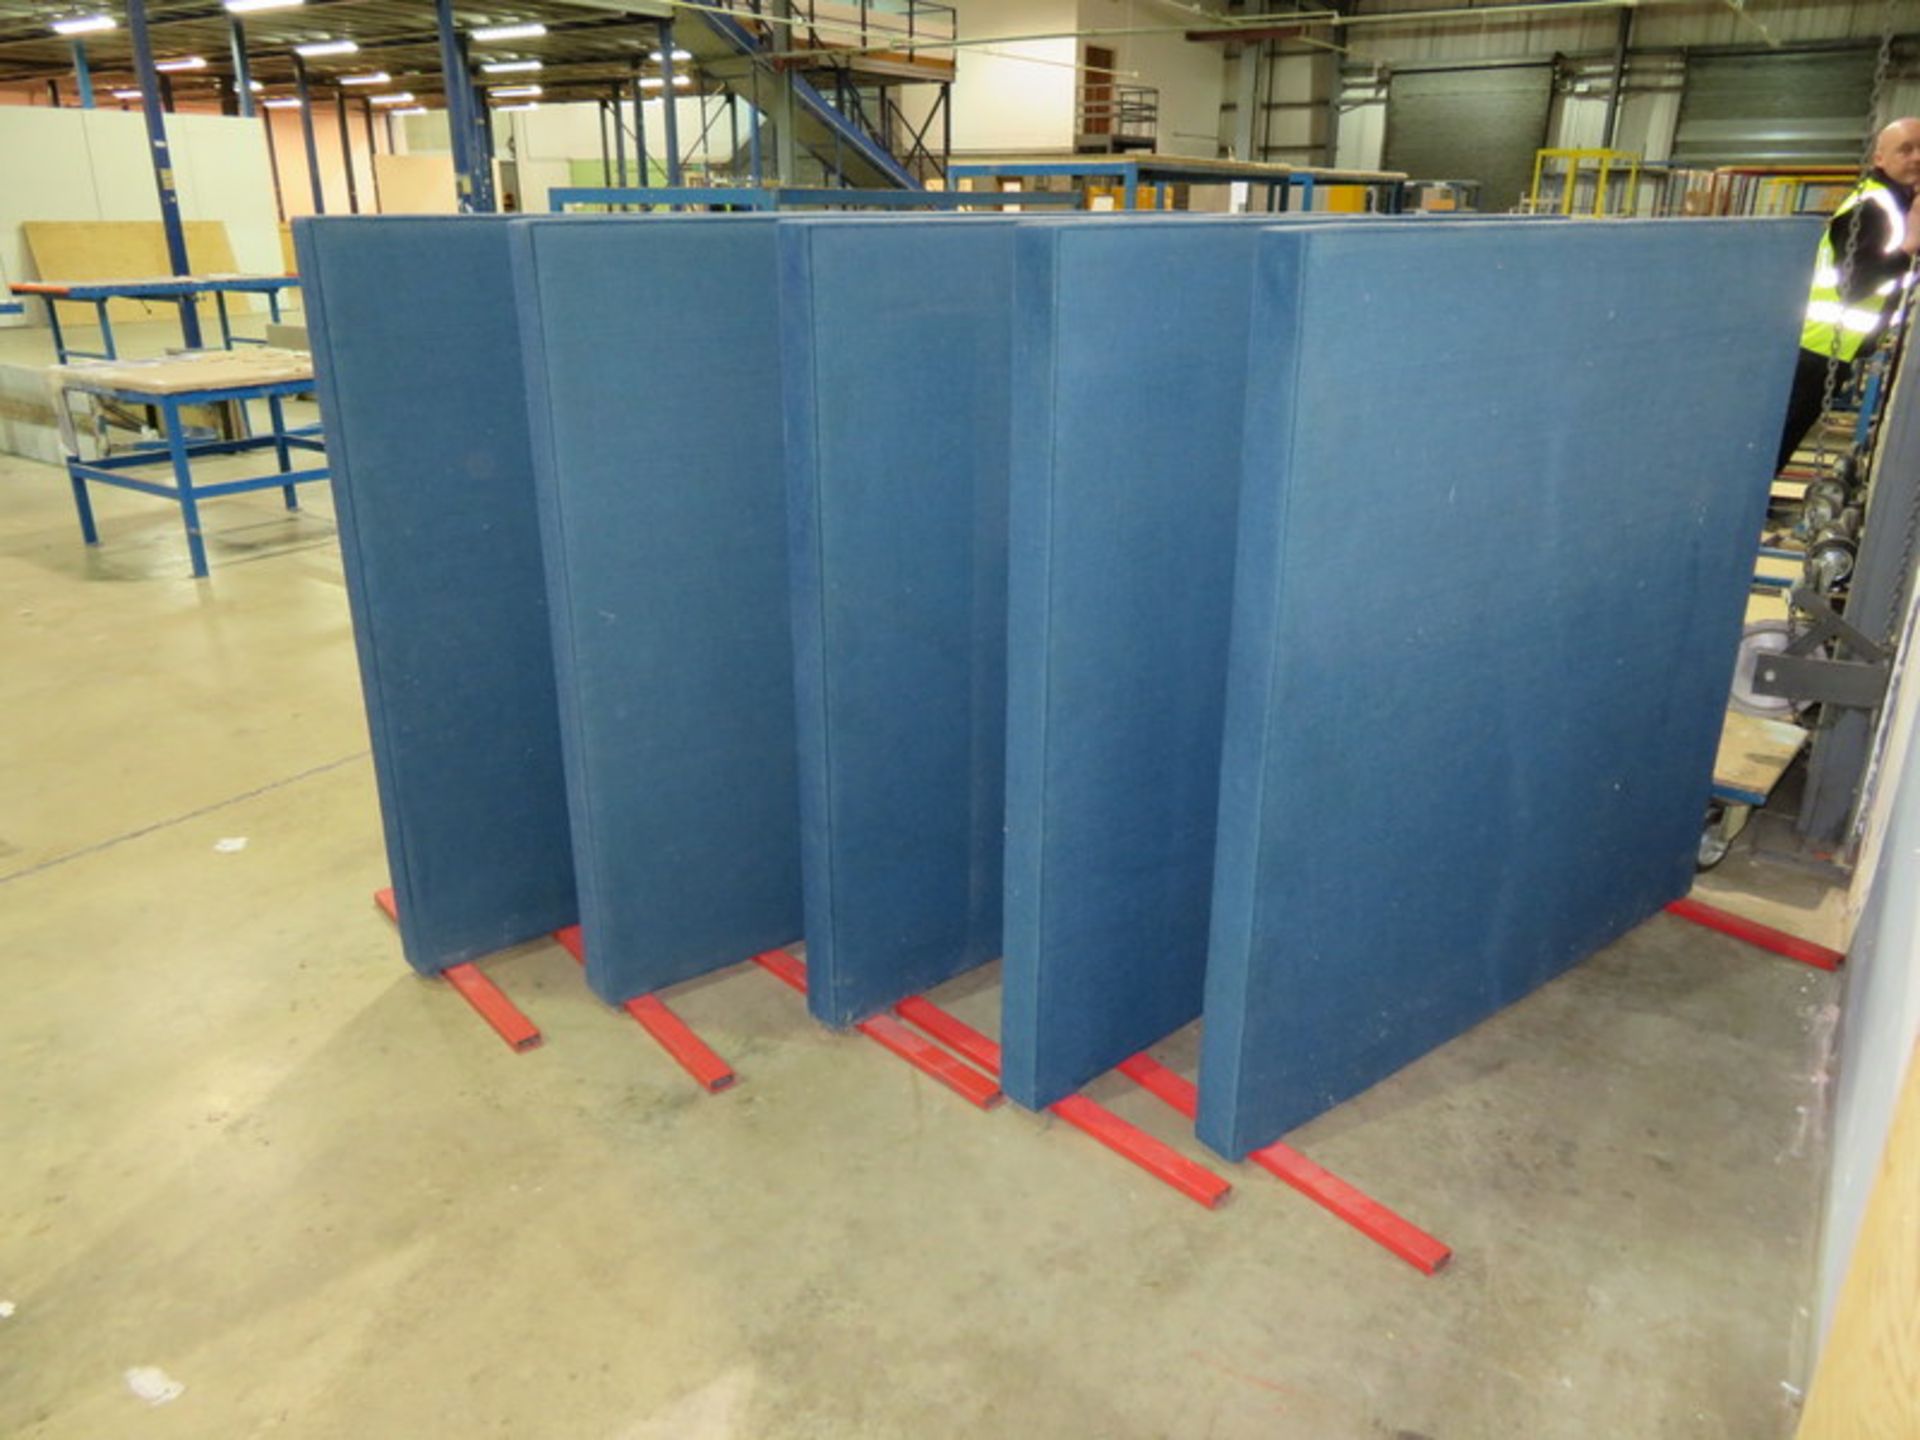 5x Free standing double sided notice boards / dividers - 1520 x 85x 1440mm (LxDxH) - Bild 2 aus 2